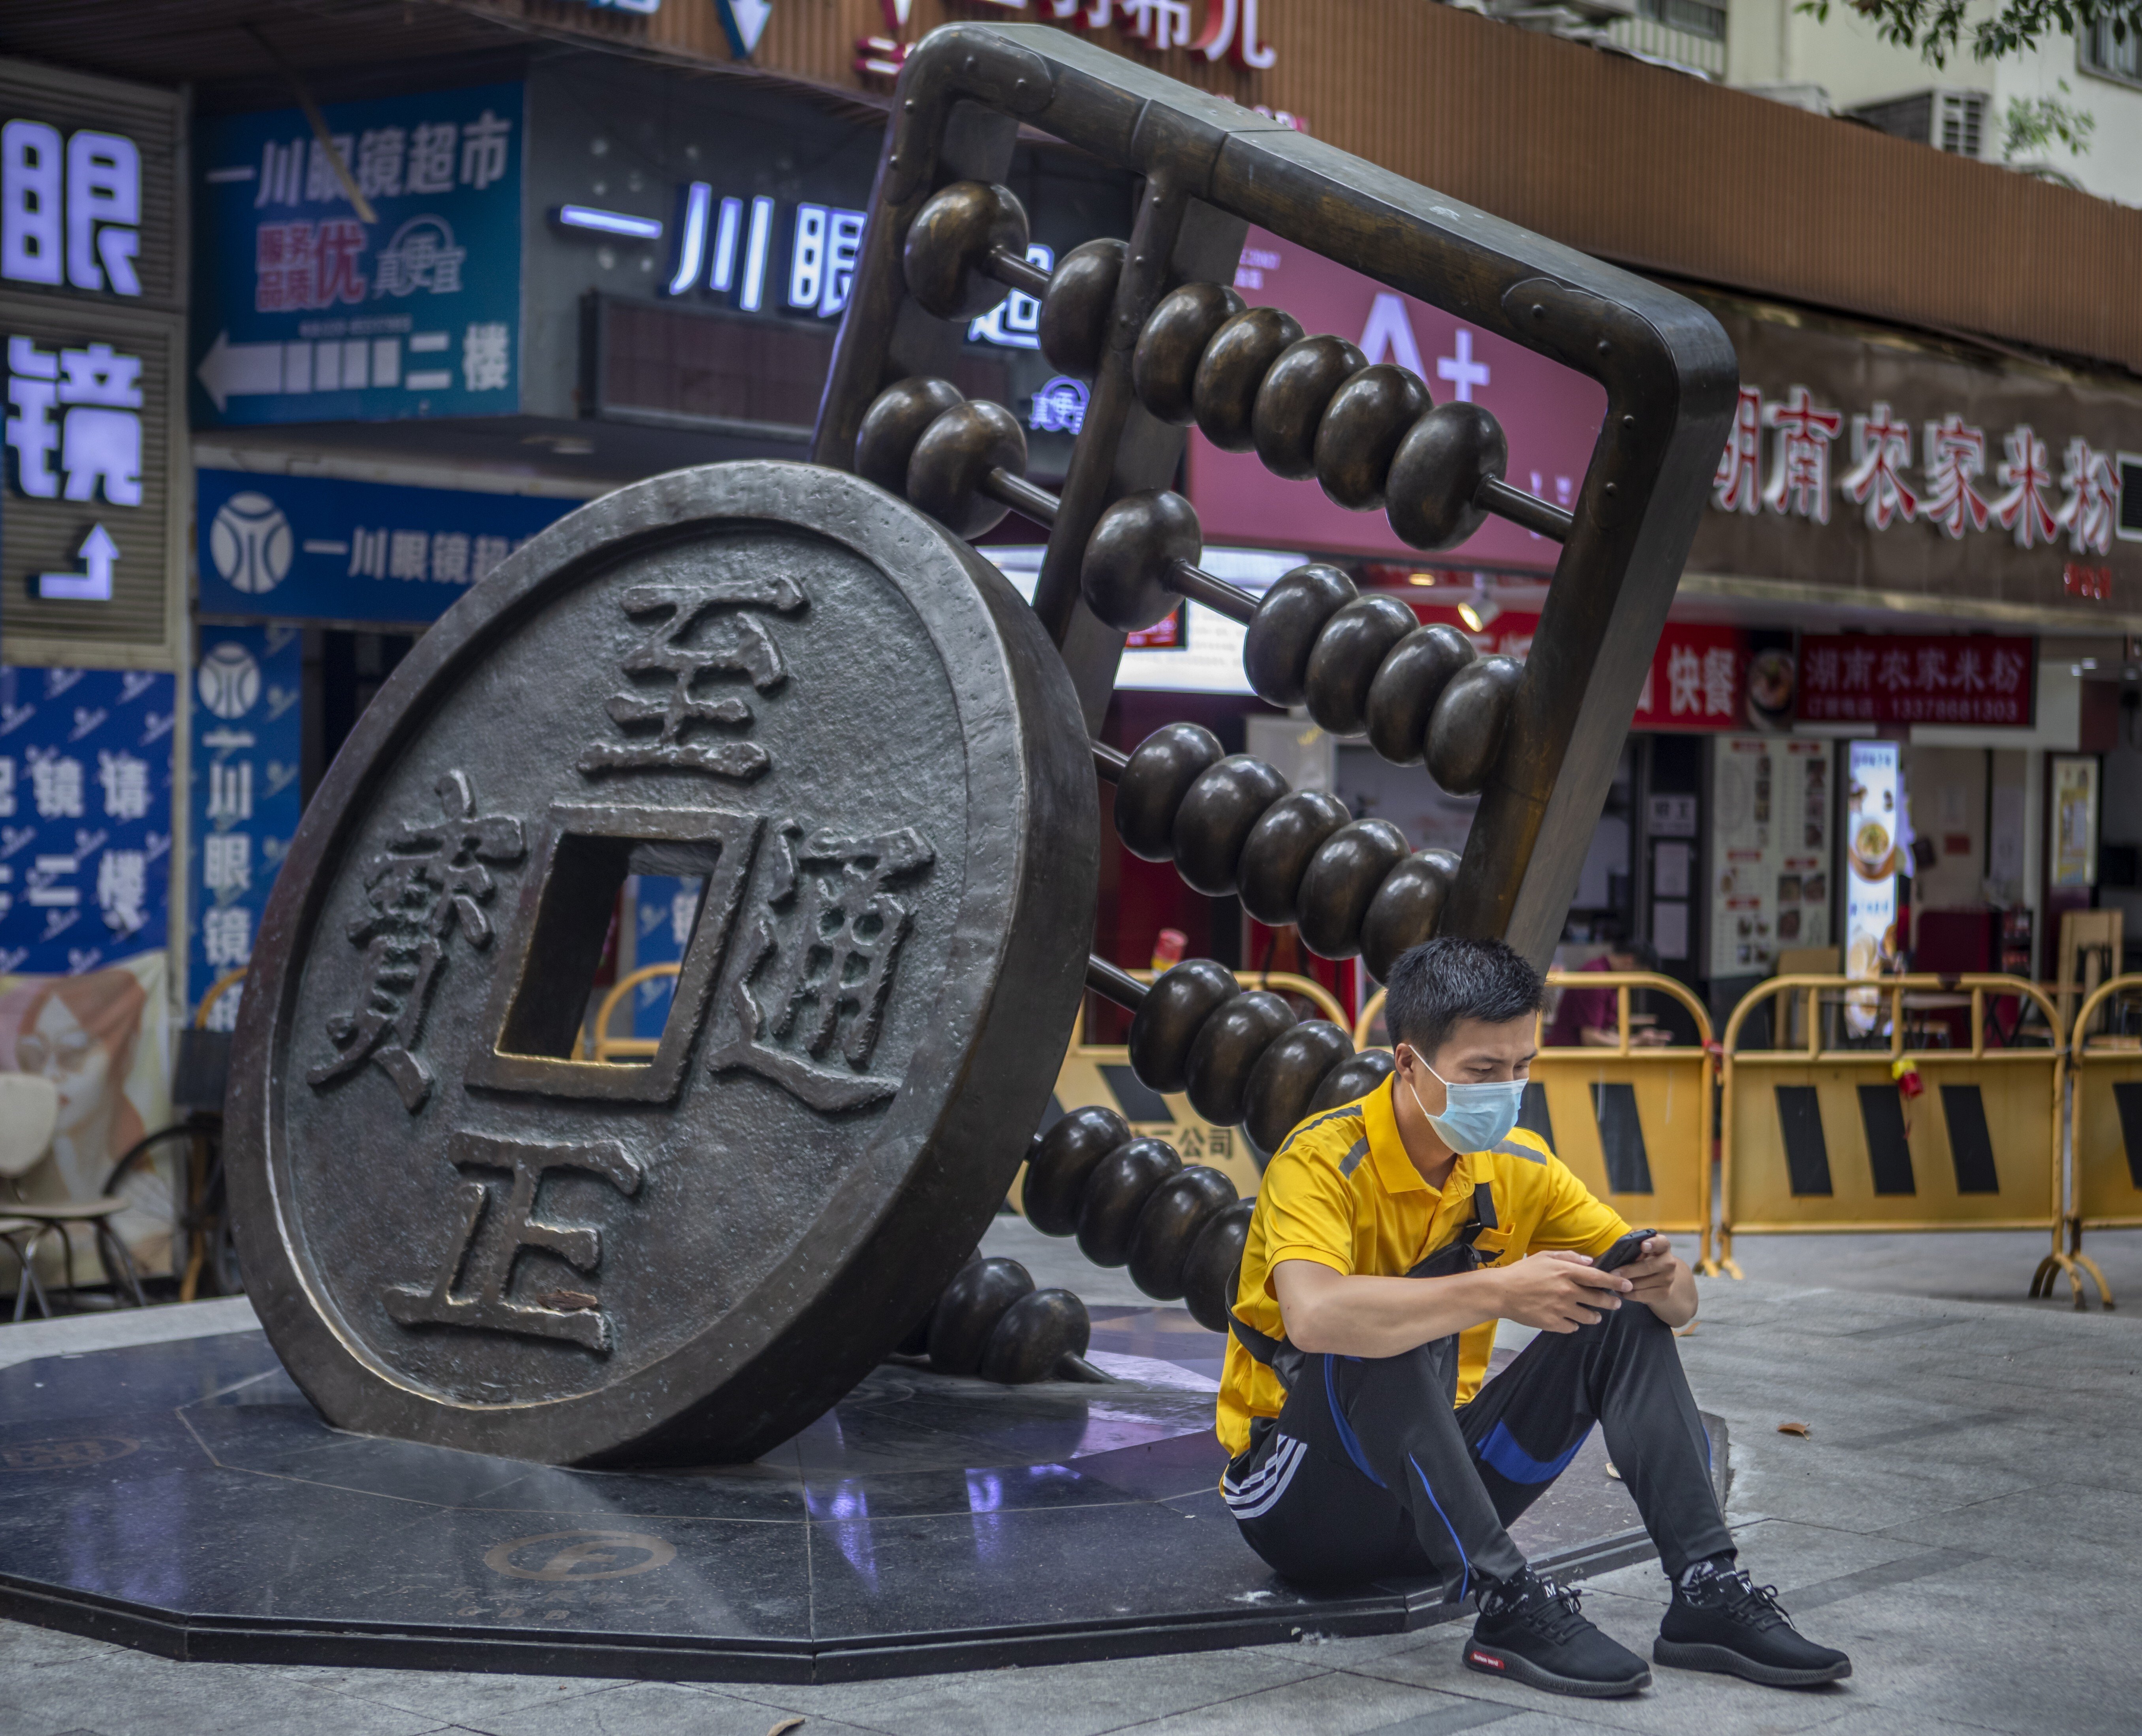 A man uses his cellphone as he sits next to a sculpture representing the renminbi and an abacus in Guangzhou, China, on May 14. China has launched a trial of a new state-run digital currency in four cities: Shenzhen, Suzhou, Chengdu and Xiongan. Photo: EPA-EFE